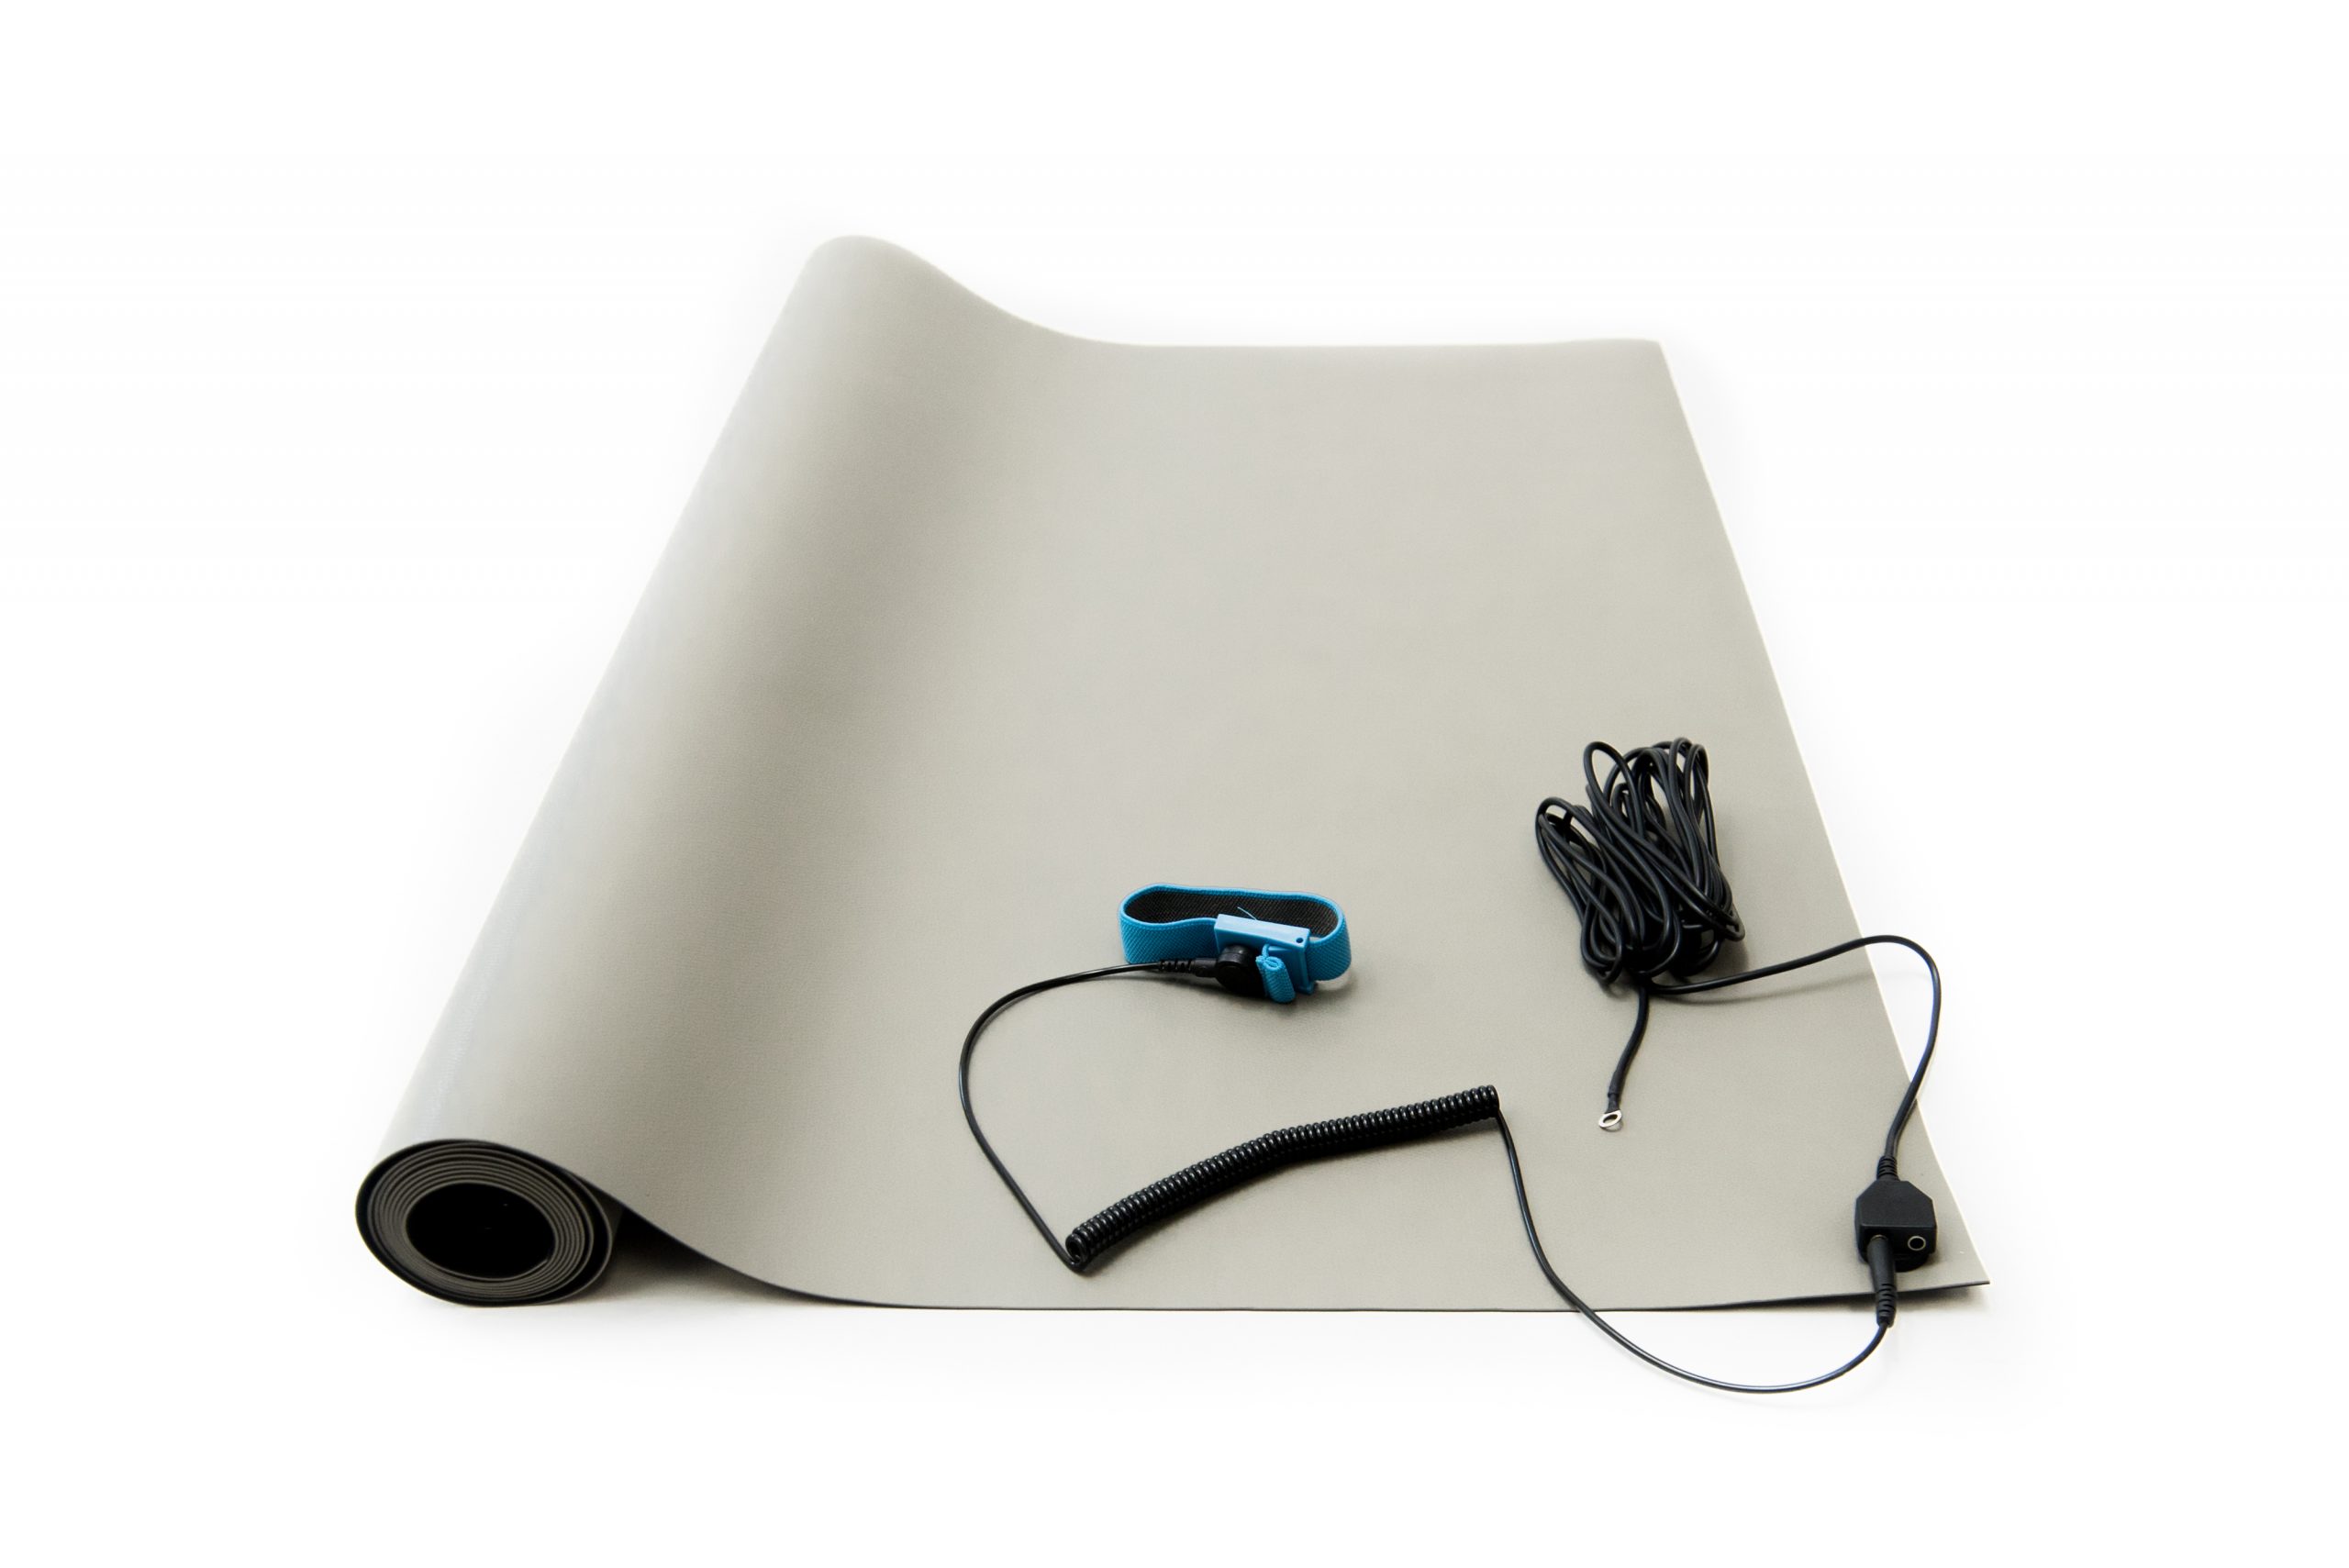 Blue 2.5 Wide x 4 Long x 0.093 Thick Bertech ESD 3 Layer Vinyl Mat Kit with a Wrist Strap and a Grounding Cord 